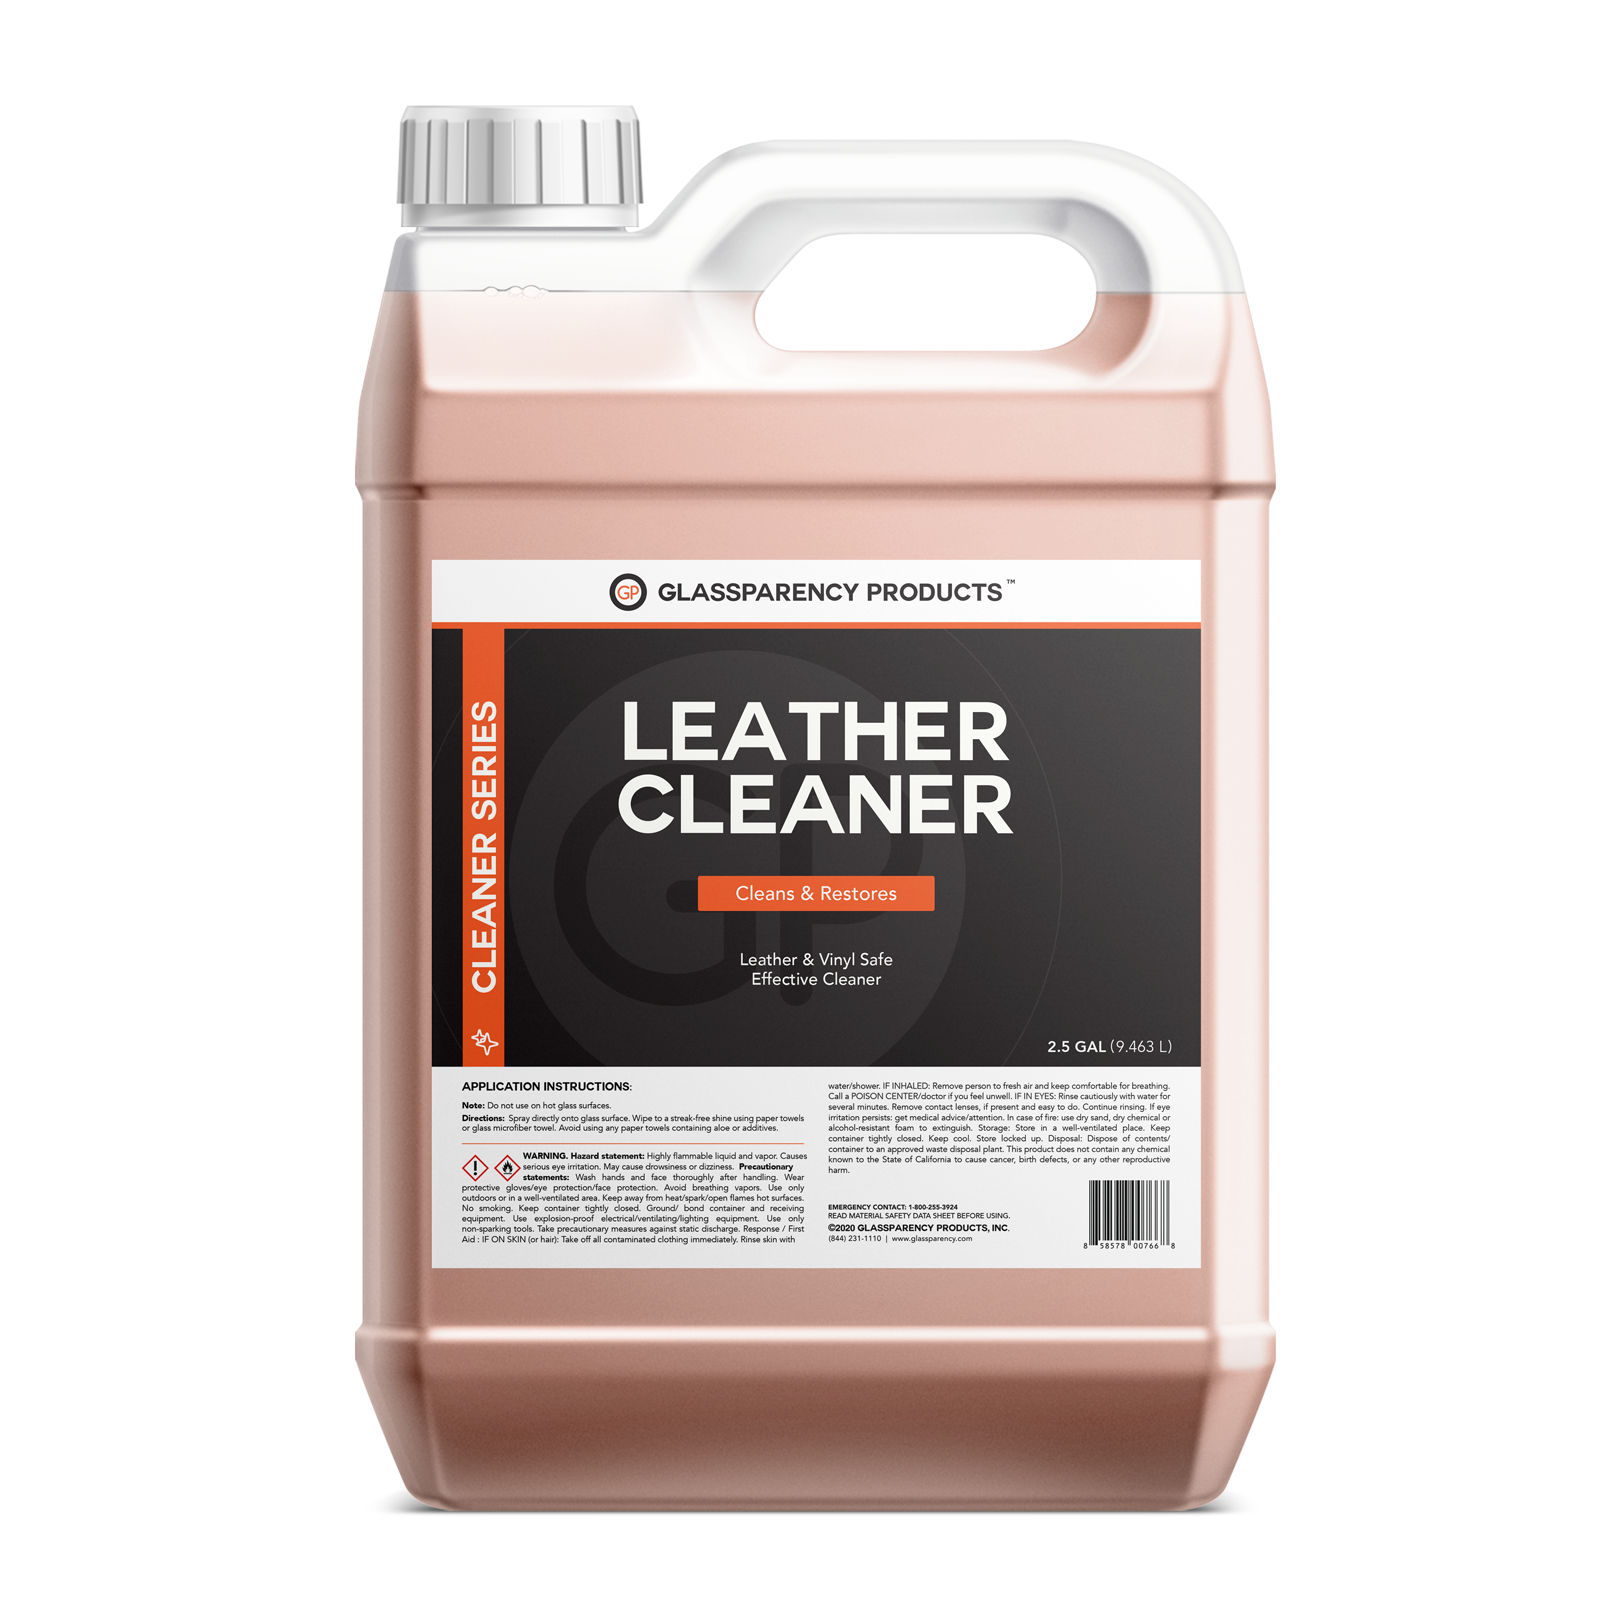 Application Video: New Leather Care Kit